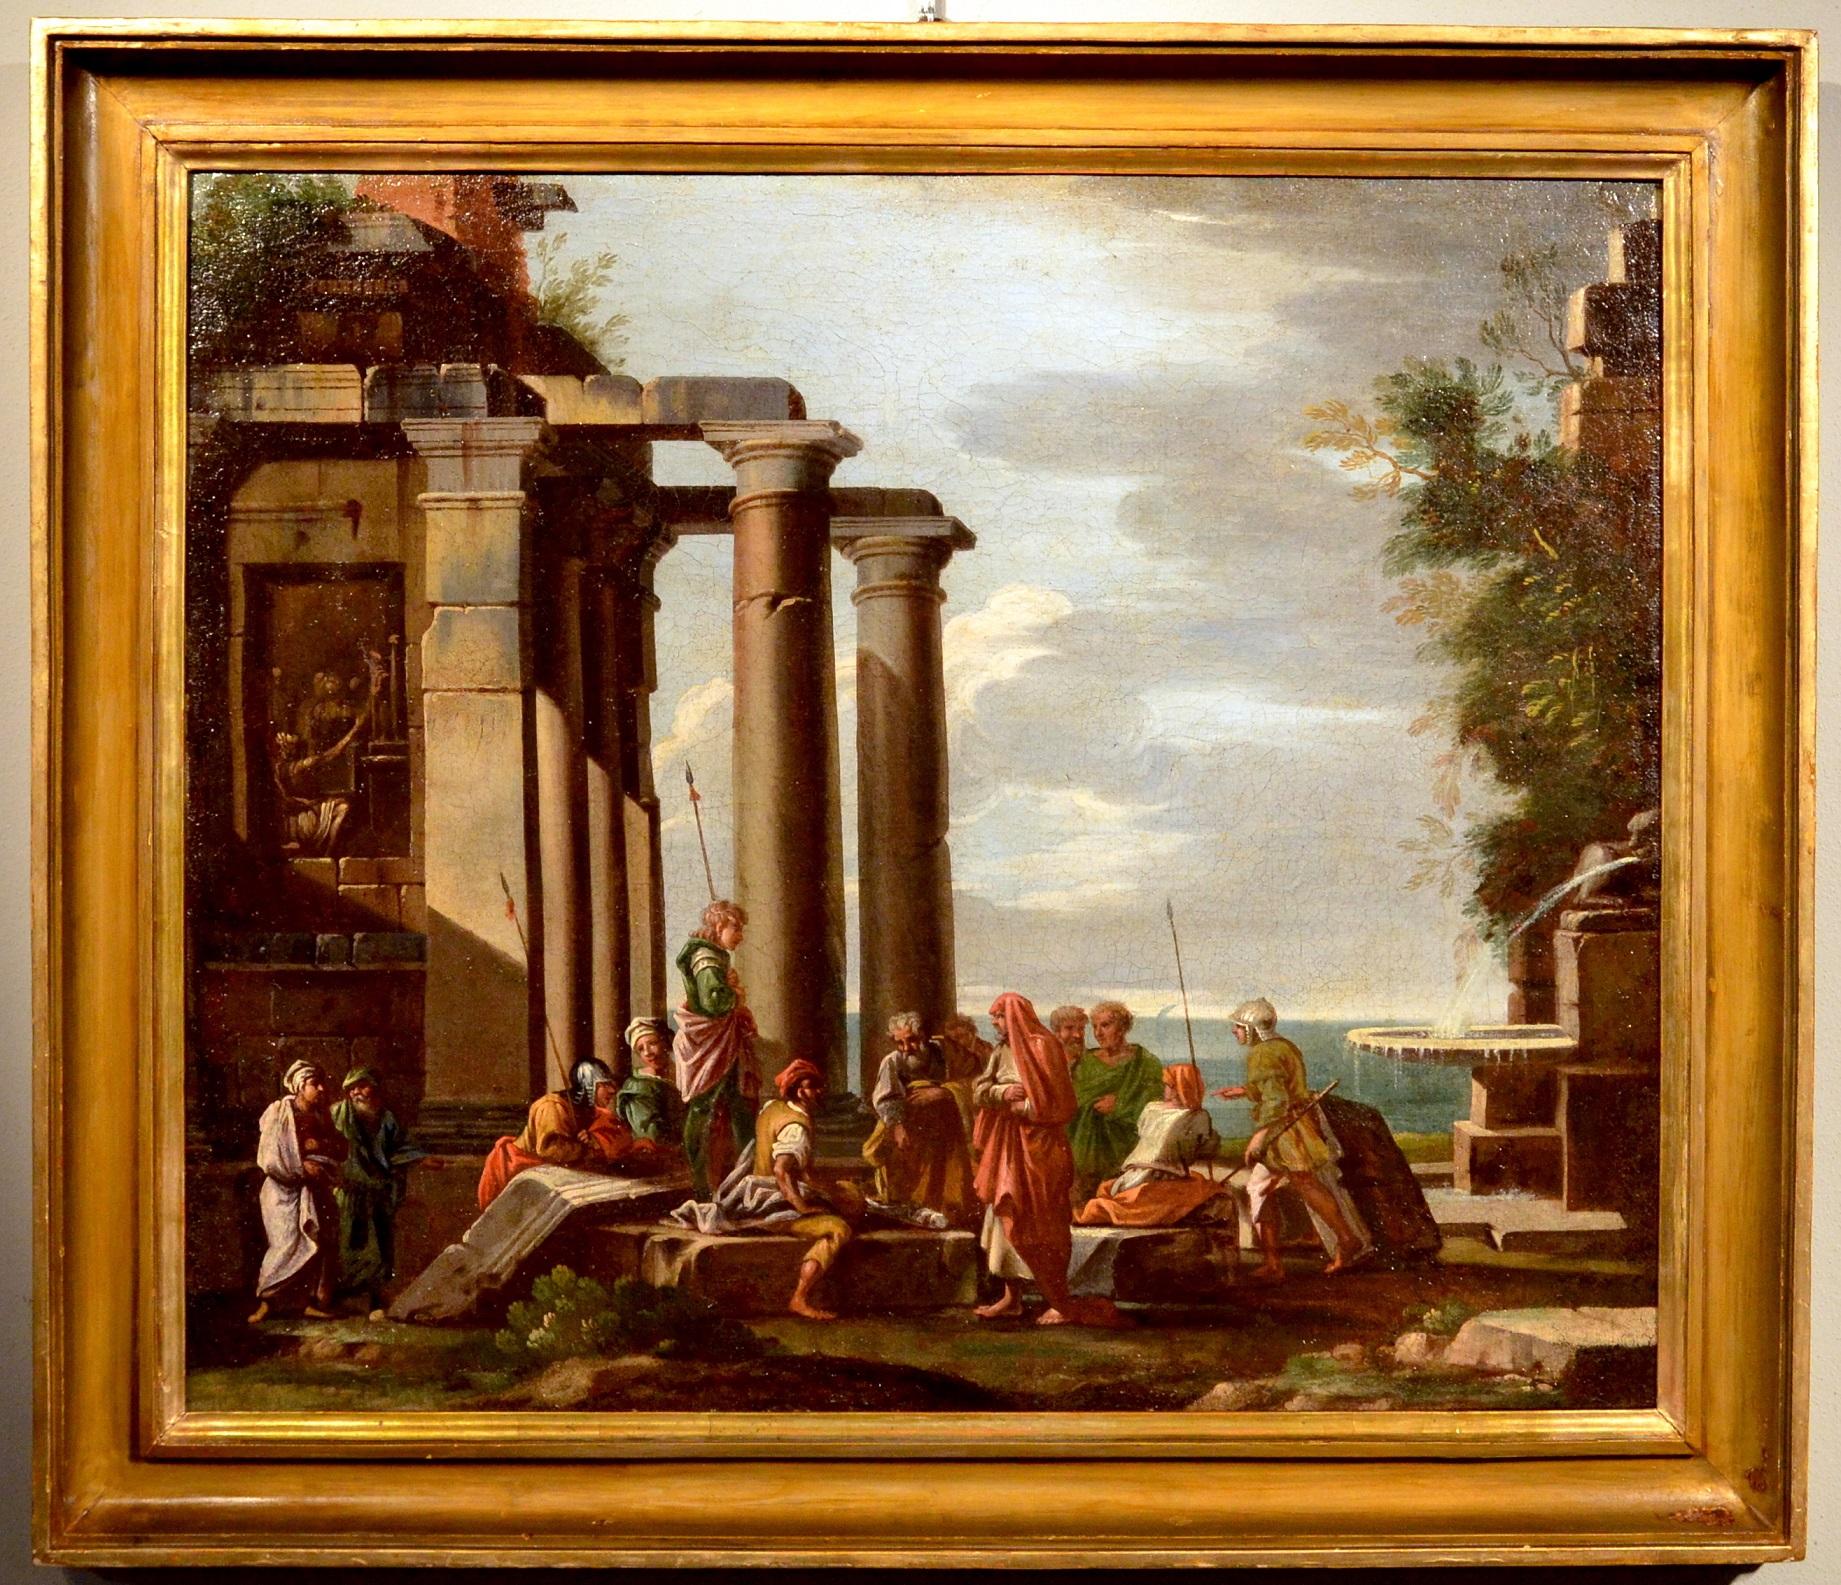 Ghisolfi Paint Oil on canvas Old master 17th Century Architectural Capriccio Art - Painting by Giovanni Ghisolfi (Milan 1623 - 1683)